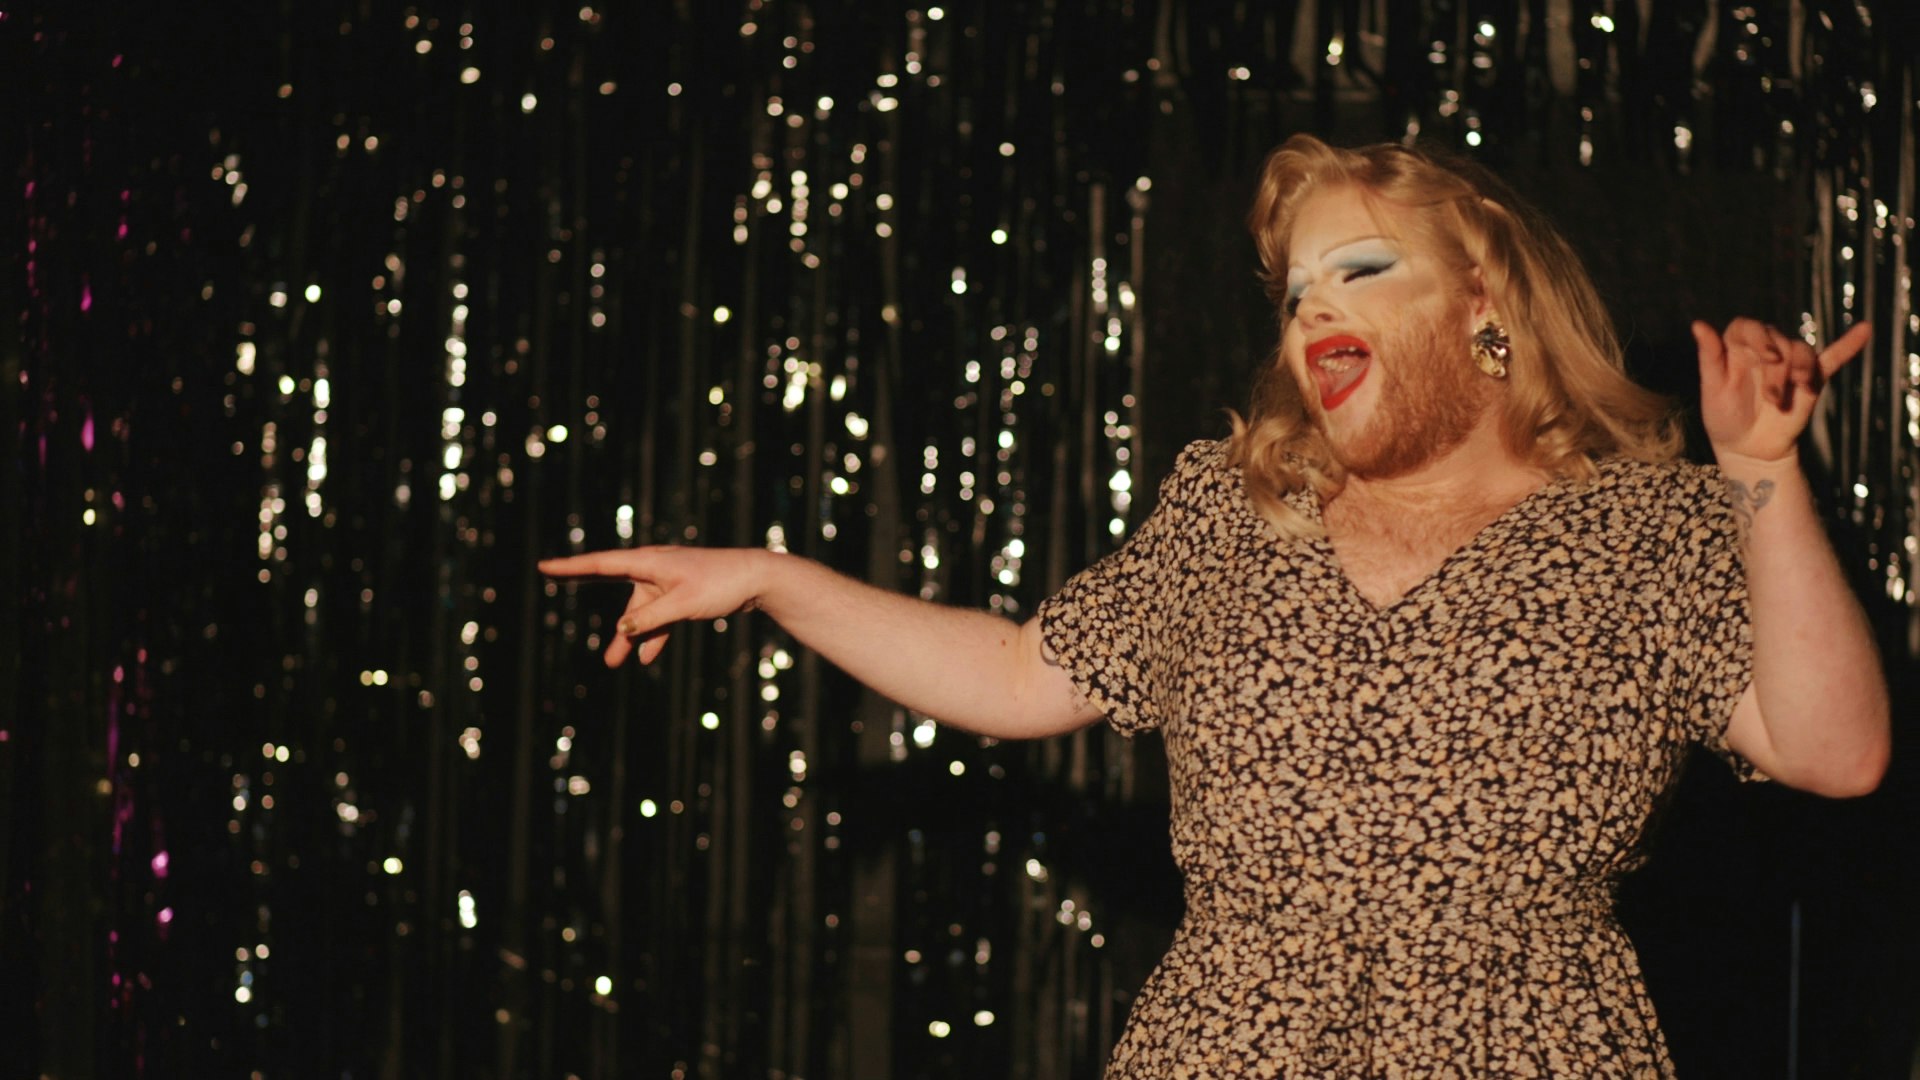 The London pub reigniting the city's drag scene